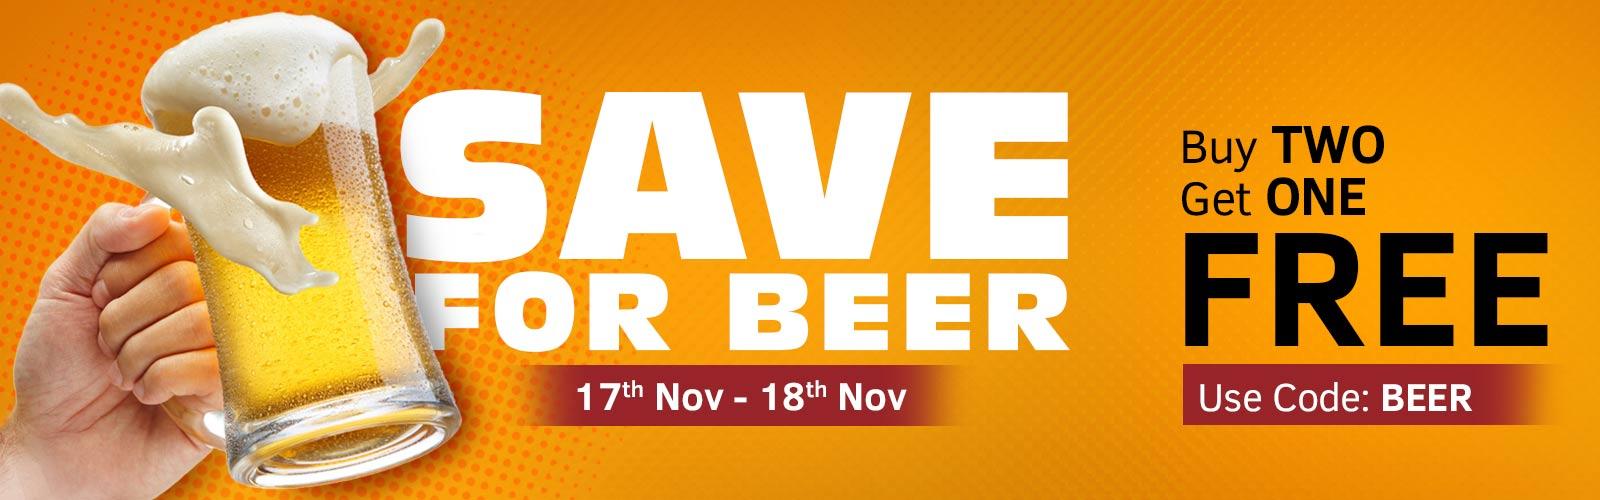 Buy 2 Get 1 Free on Ustraa Save For Beer Sale (17th-18th Nov)